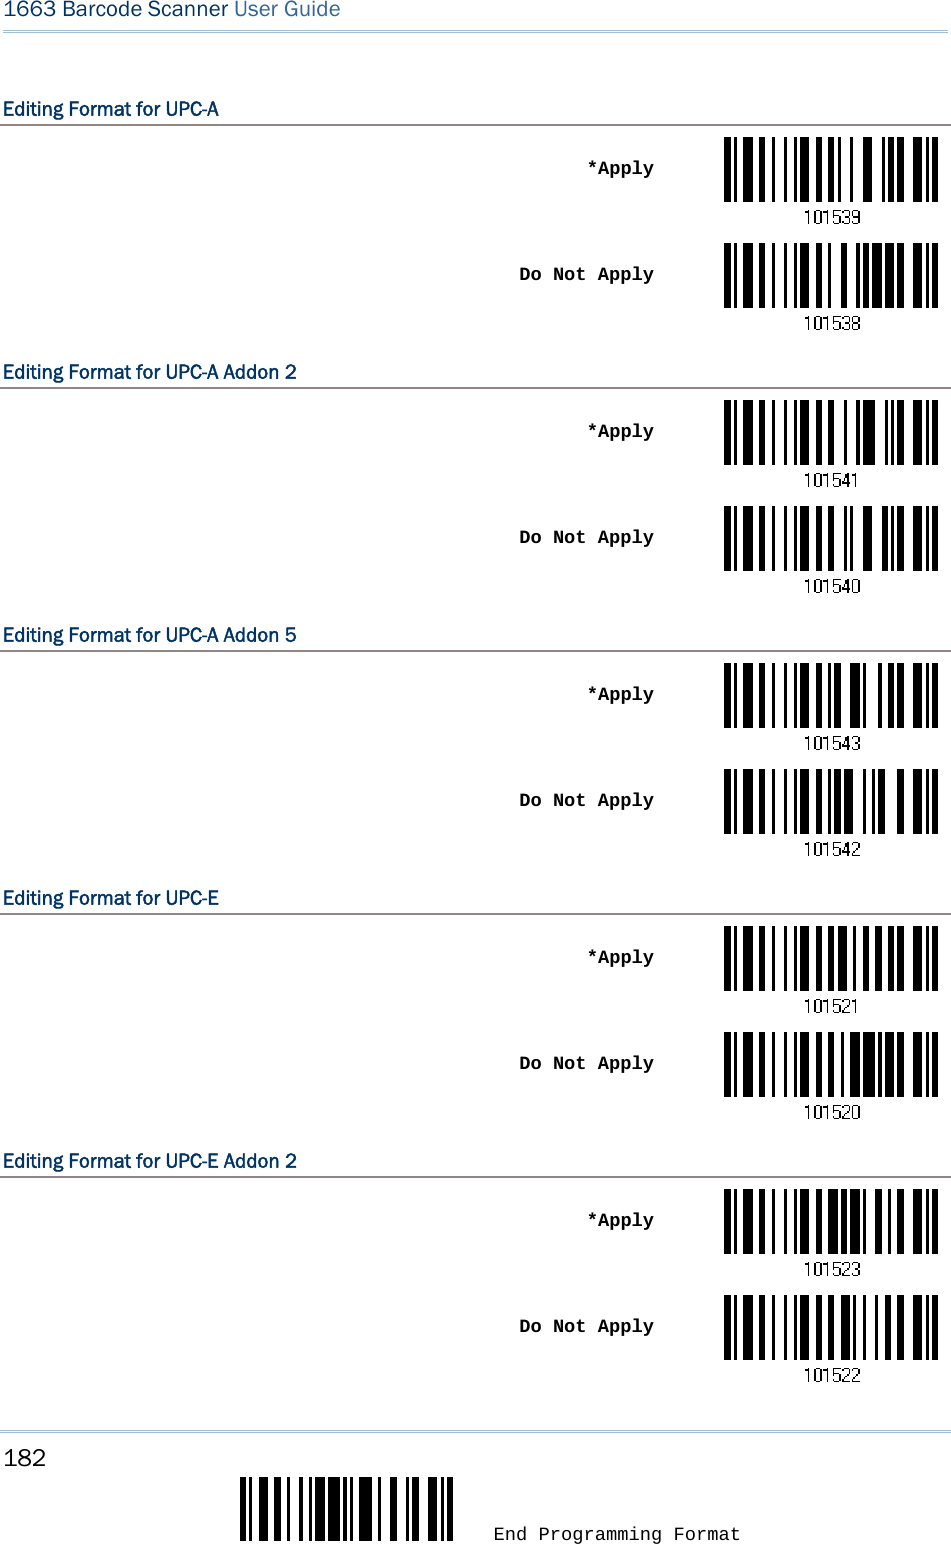 182  End Programming Format 1663 Barcode Scanner User Guide  Editing Format for UPC-A  *Apply Do Not ApplyEditing Format for UPC-A Addon 2  *Apply Do Not ApplyEditing Format for UPC-A Addon 5  *Apply Do Not ApplyEditing Format for UPC-E  *Apply Do Not ApplyEditing Format for UPC-E Addon 2  *Apply Do Not Apply